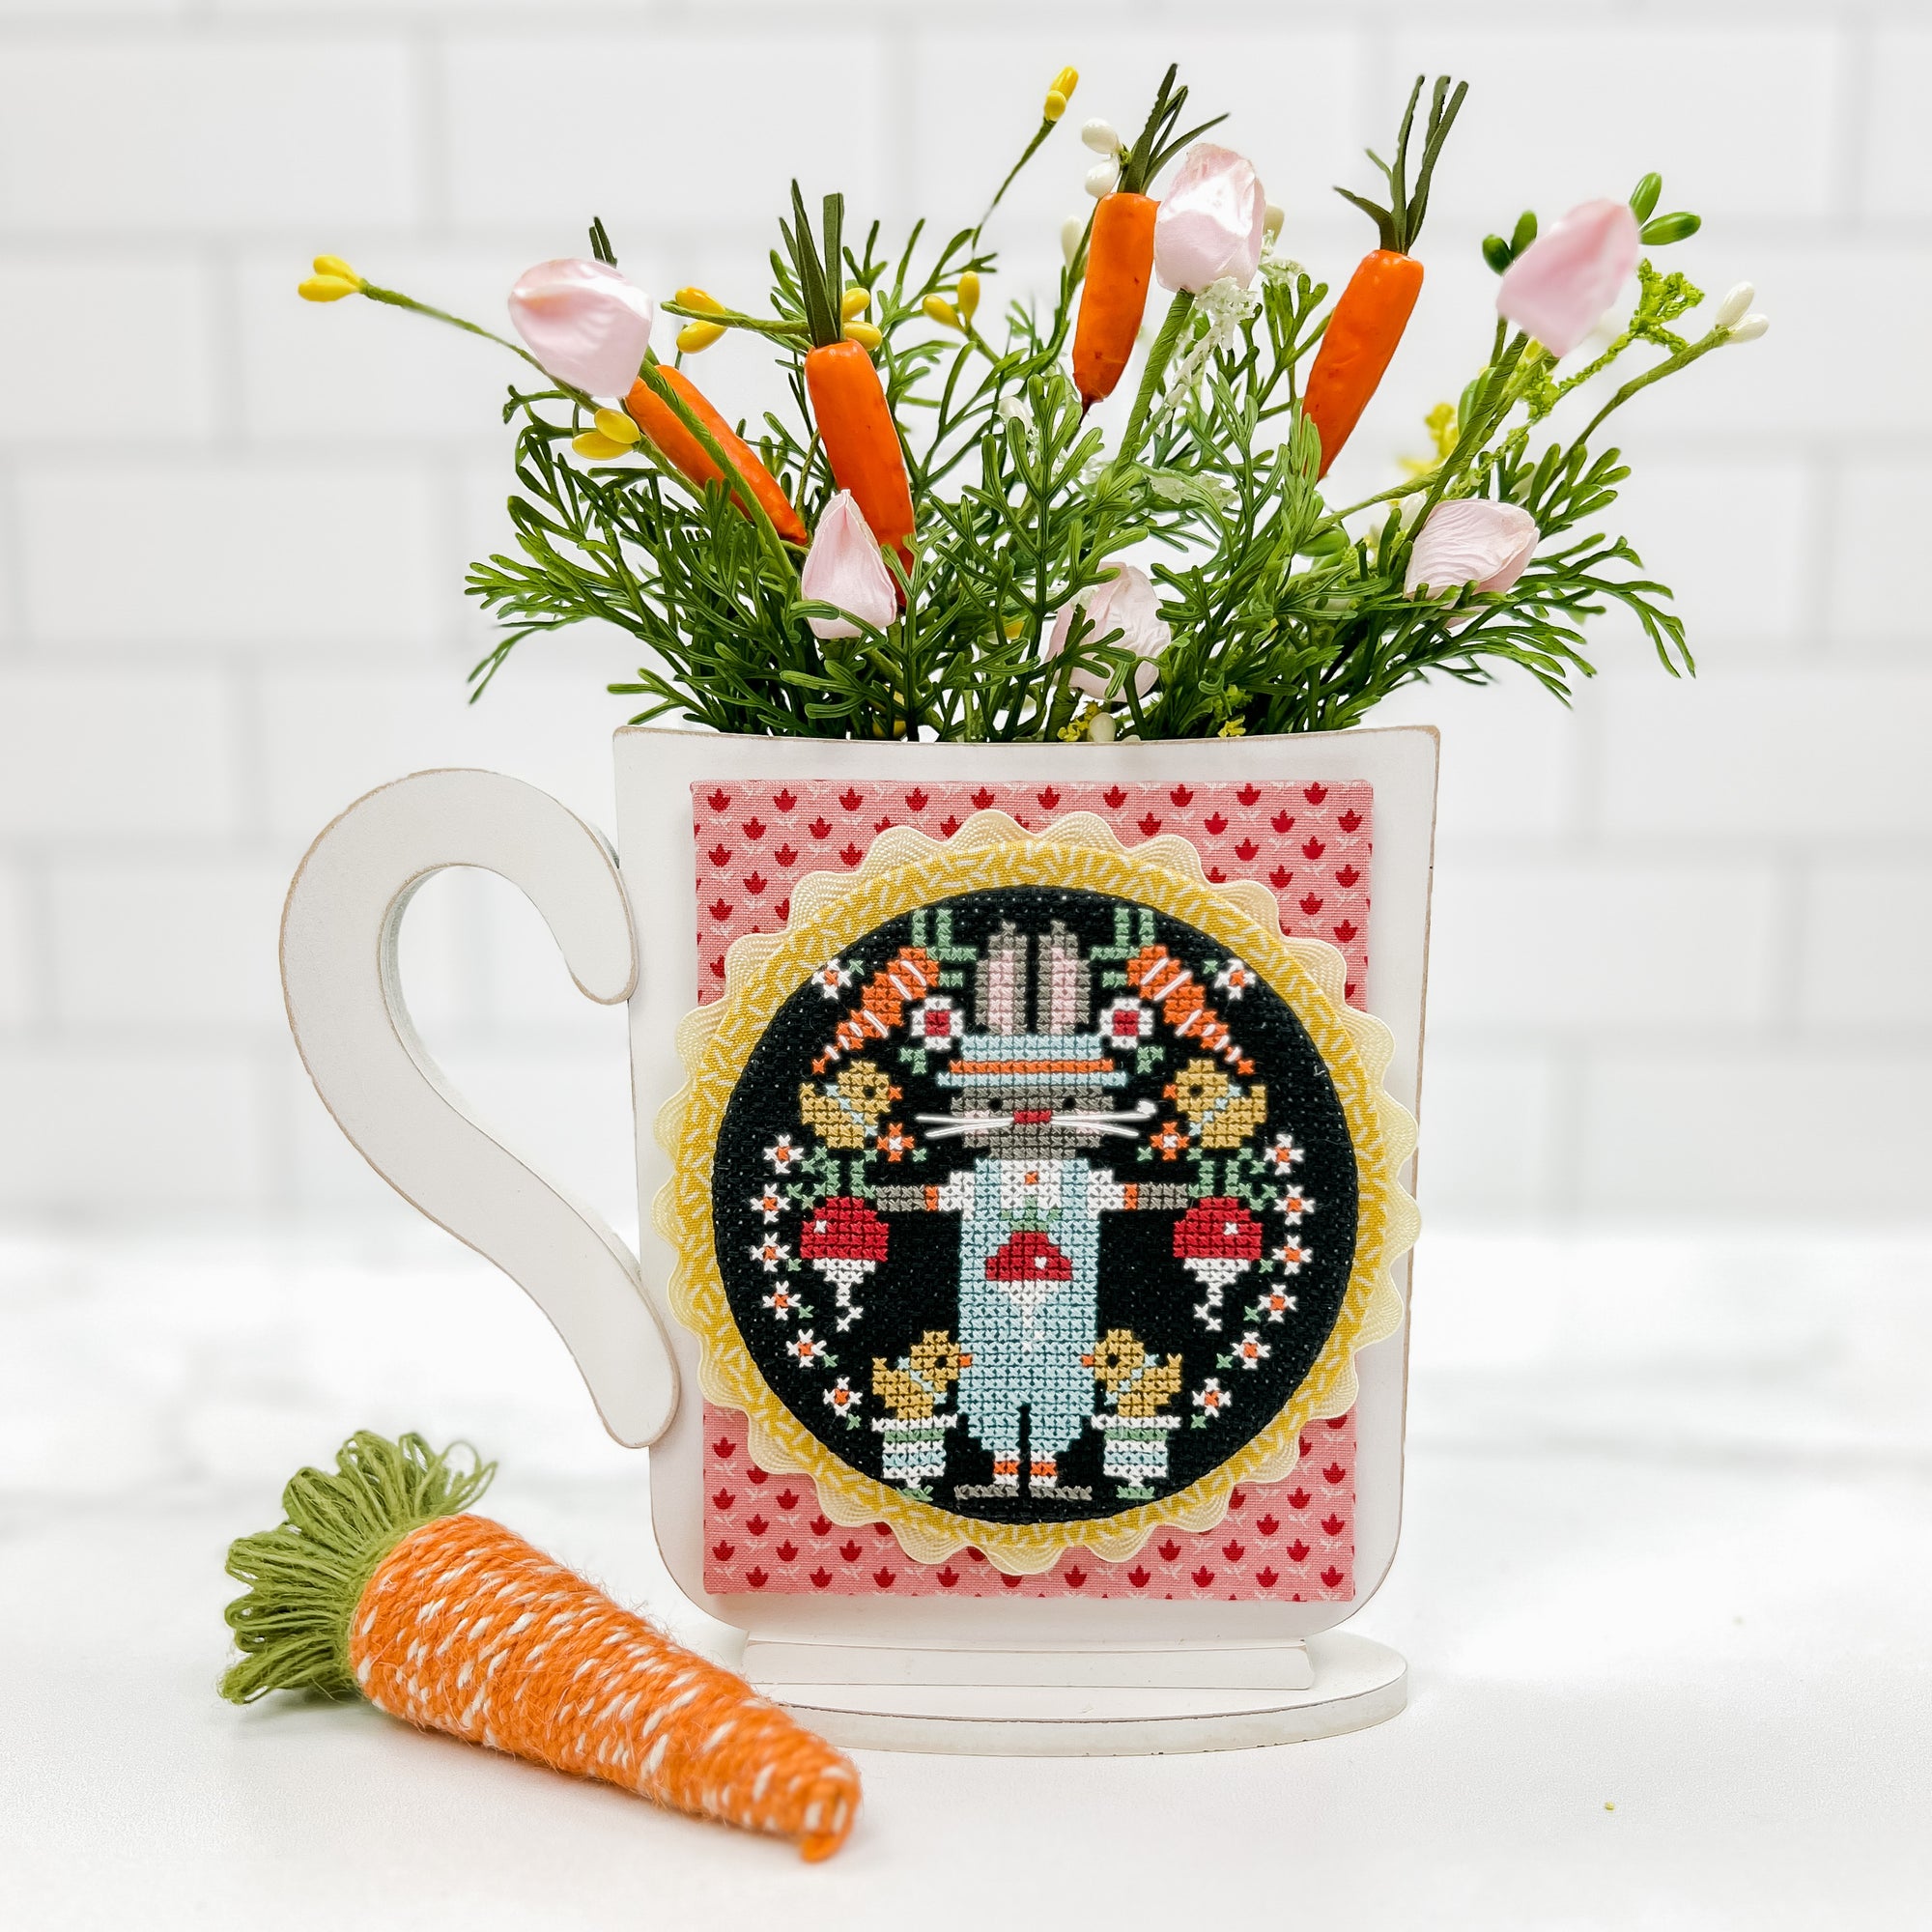 Mug cross stitch display with greenery in the top. Cross stitch is a bunny and chicks by Stitching with the Housewives